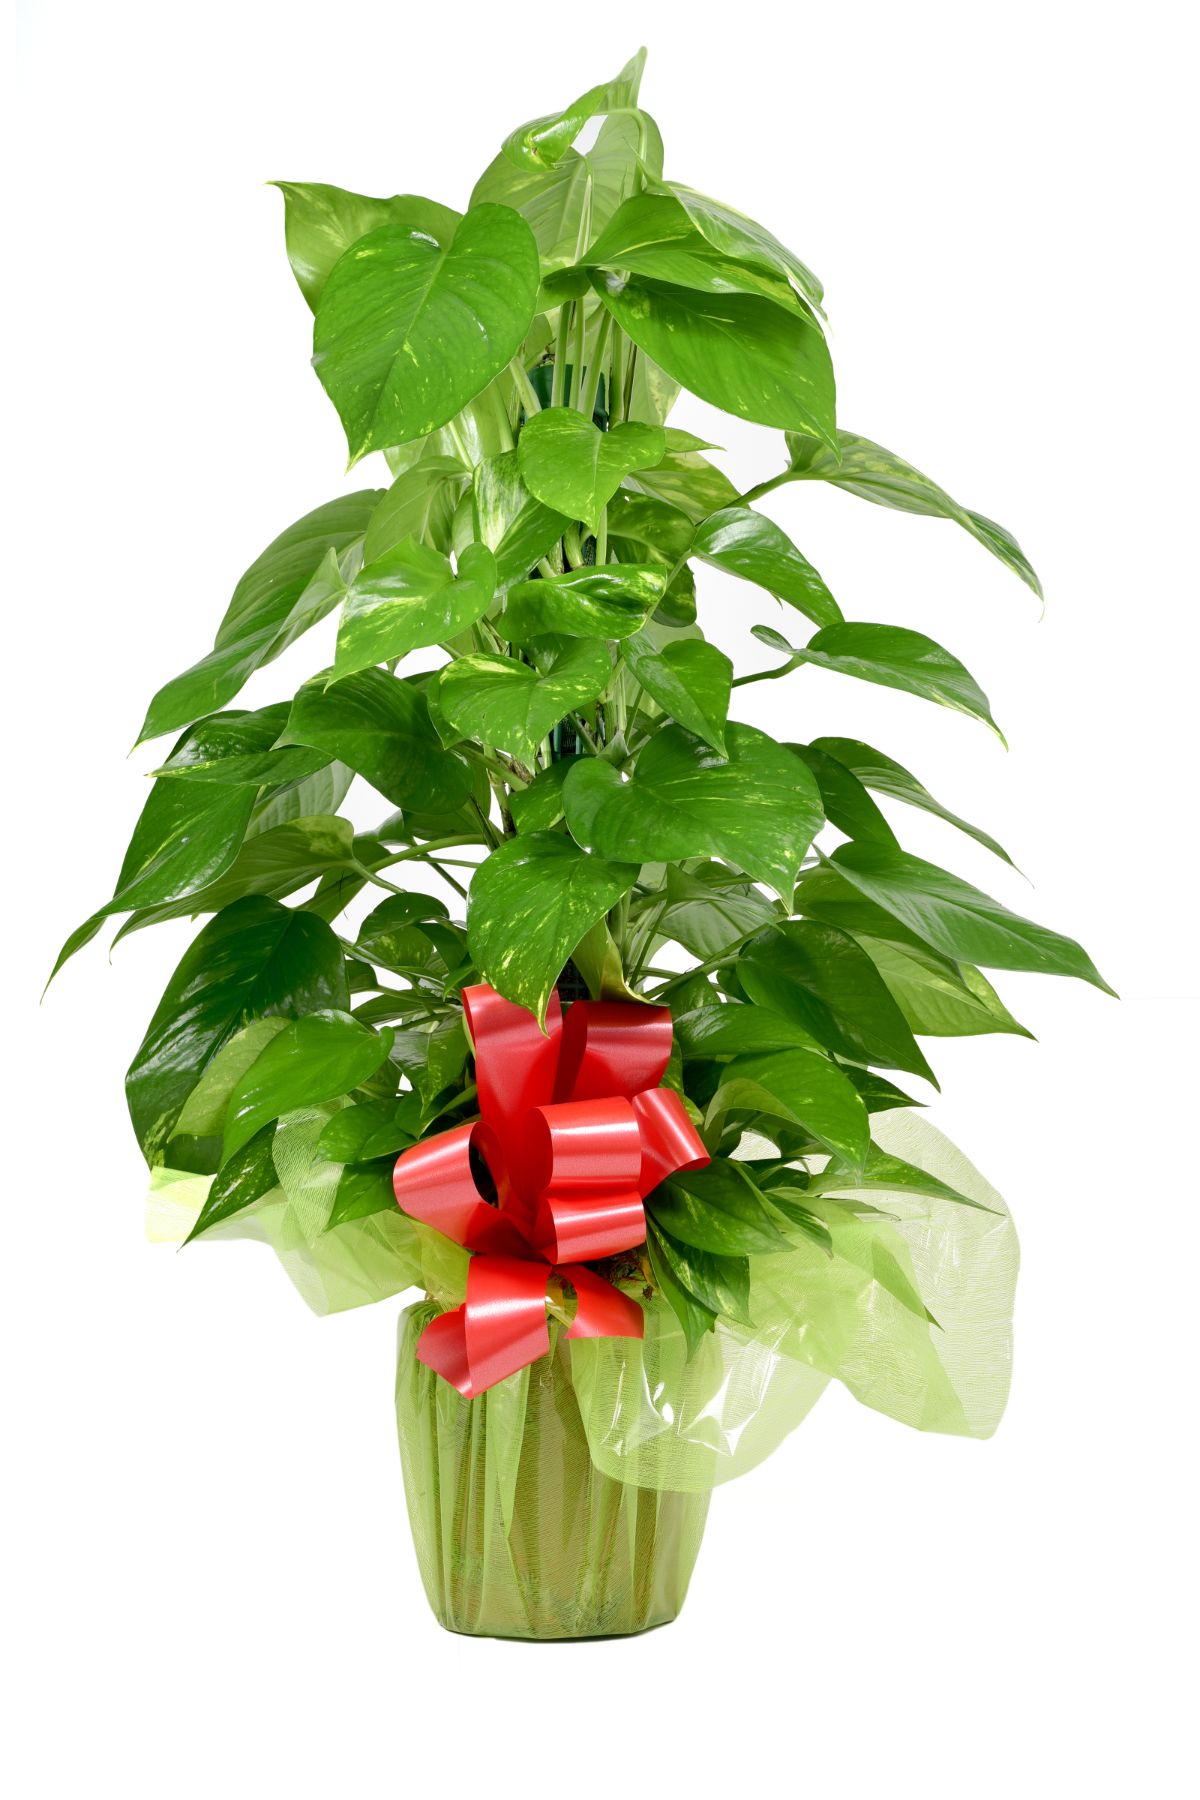 A plant wrapped in green paper with a bow for a Christmas gift.